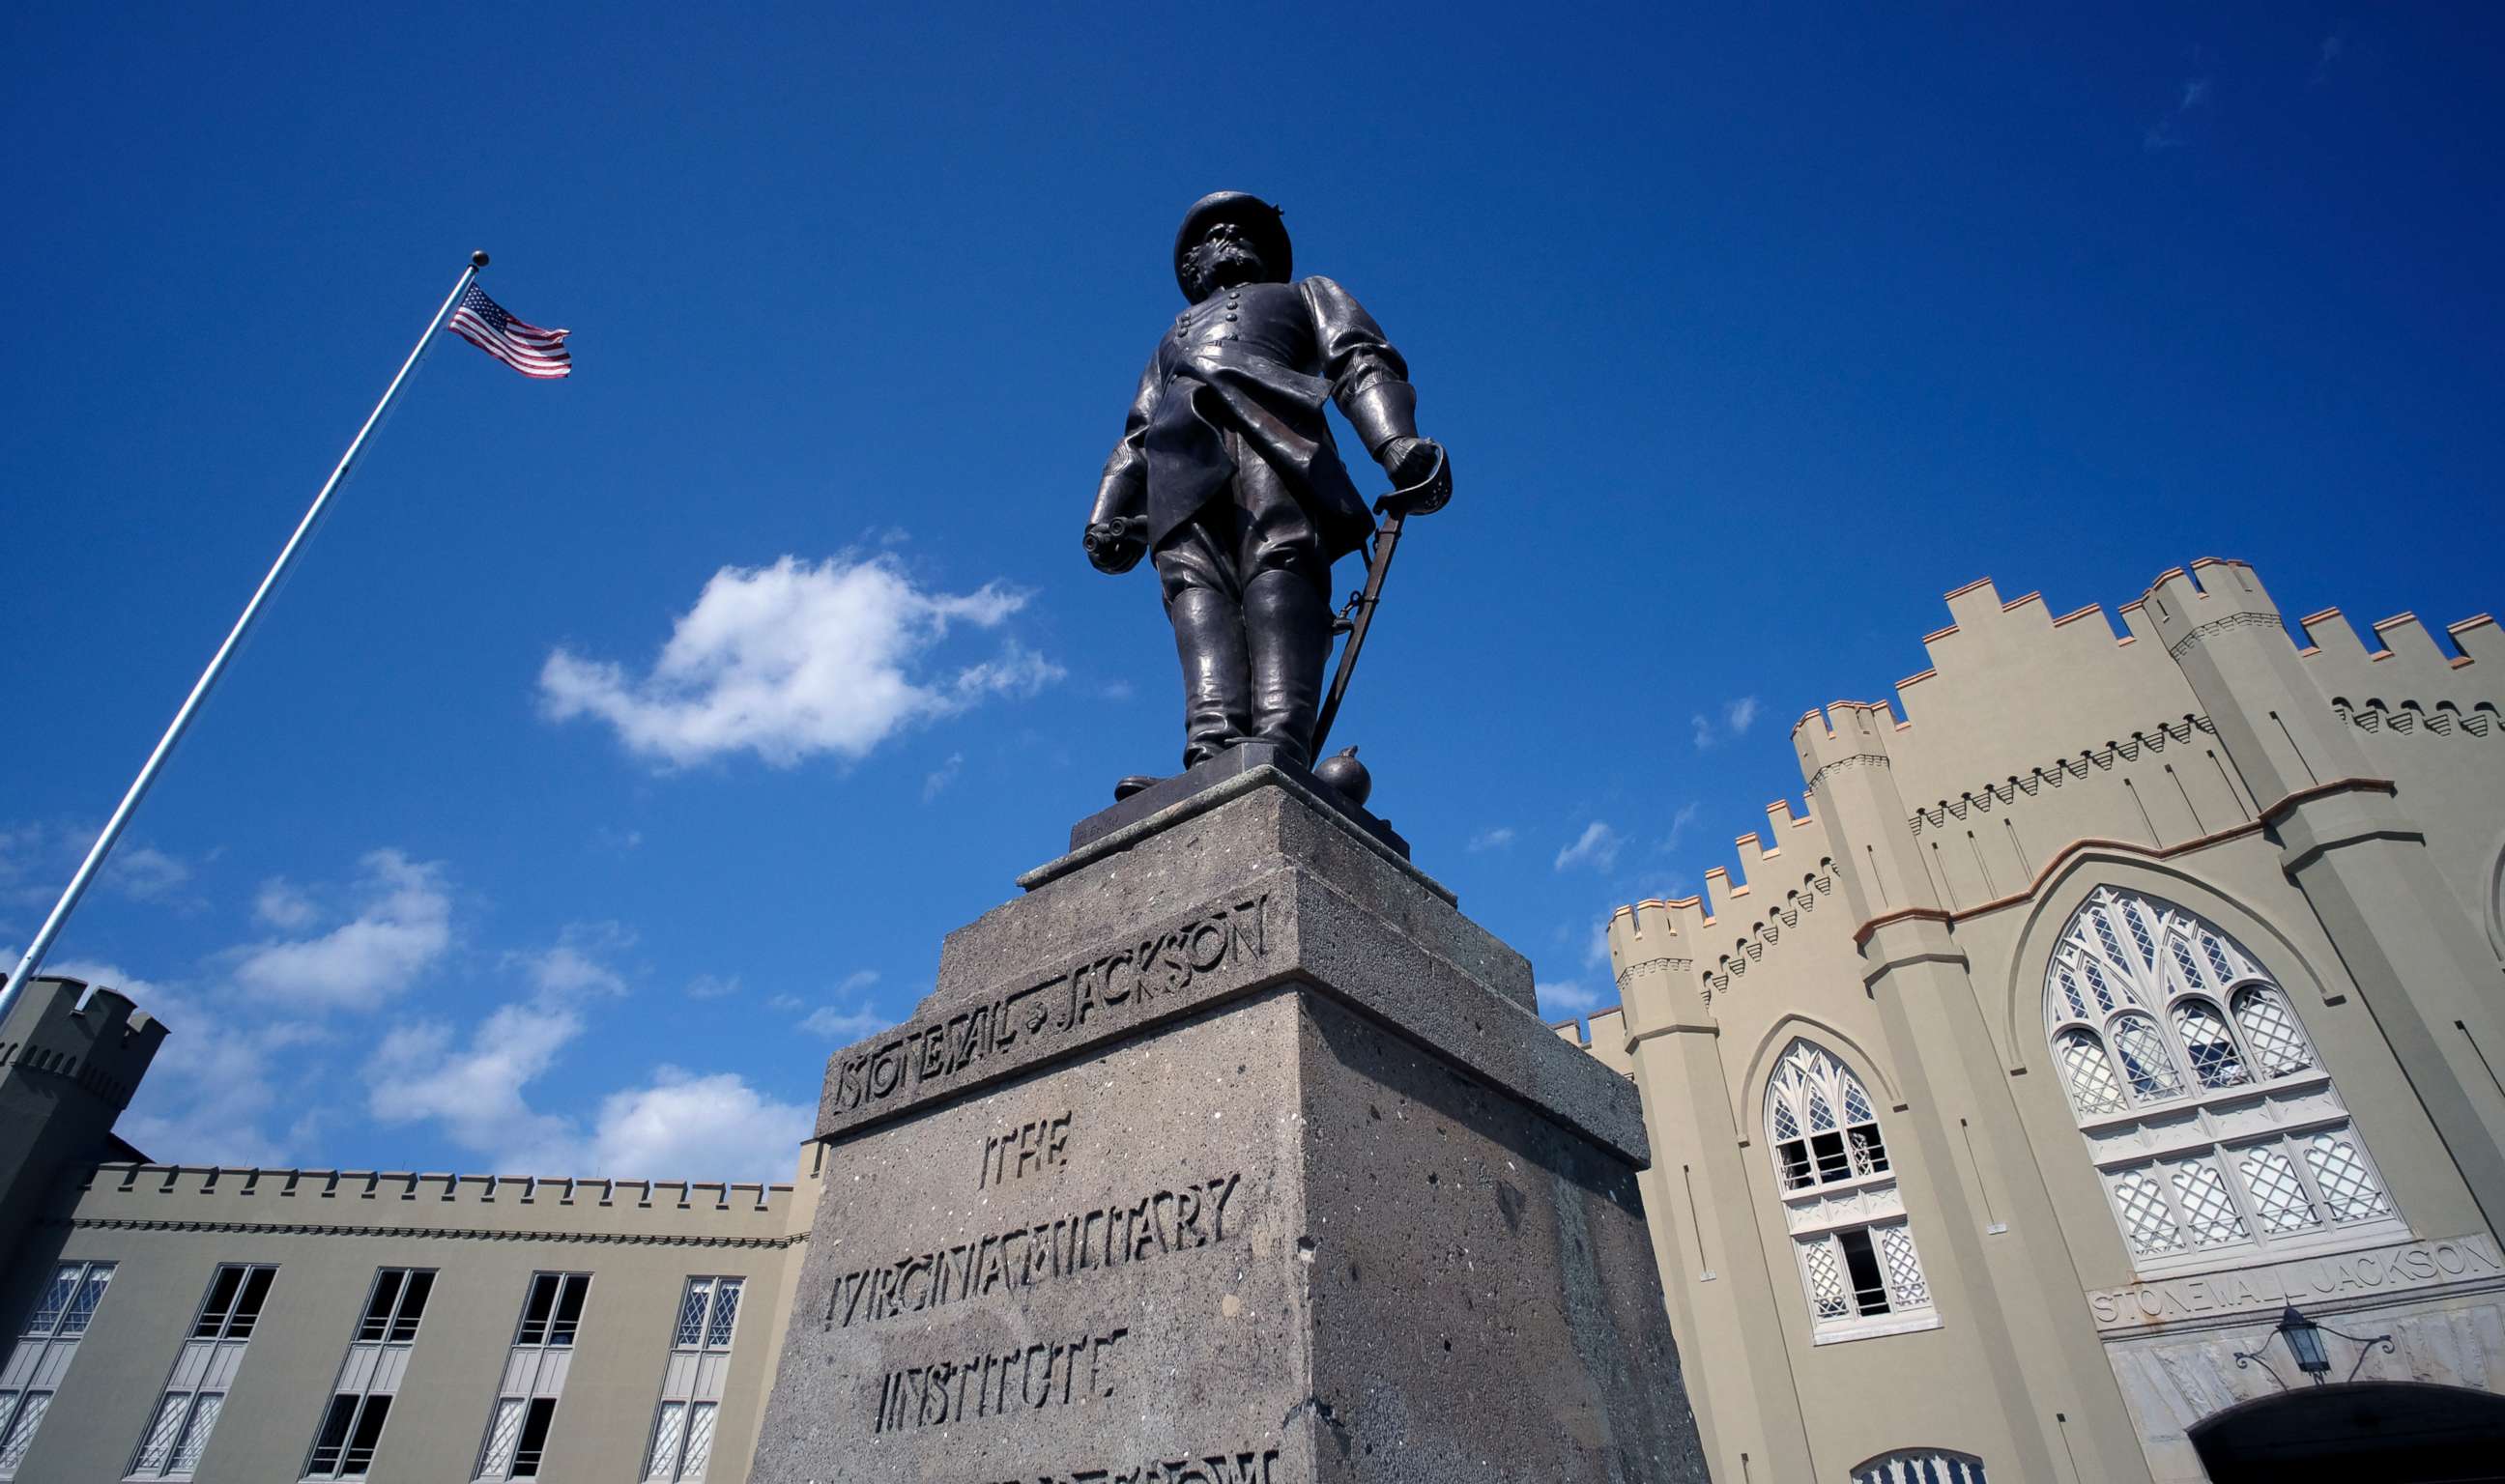 PHOTO: A statue of Gen. Thomas "Stonewall" Jackson stands in front of the barracks on the Virginia Military Institute campus in Lexington, Va., in this Sunday, Sept. 3, 2017, file photo.